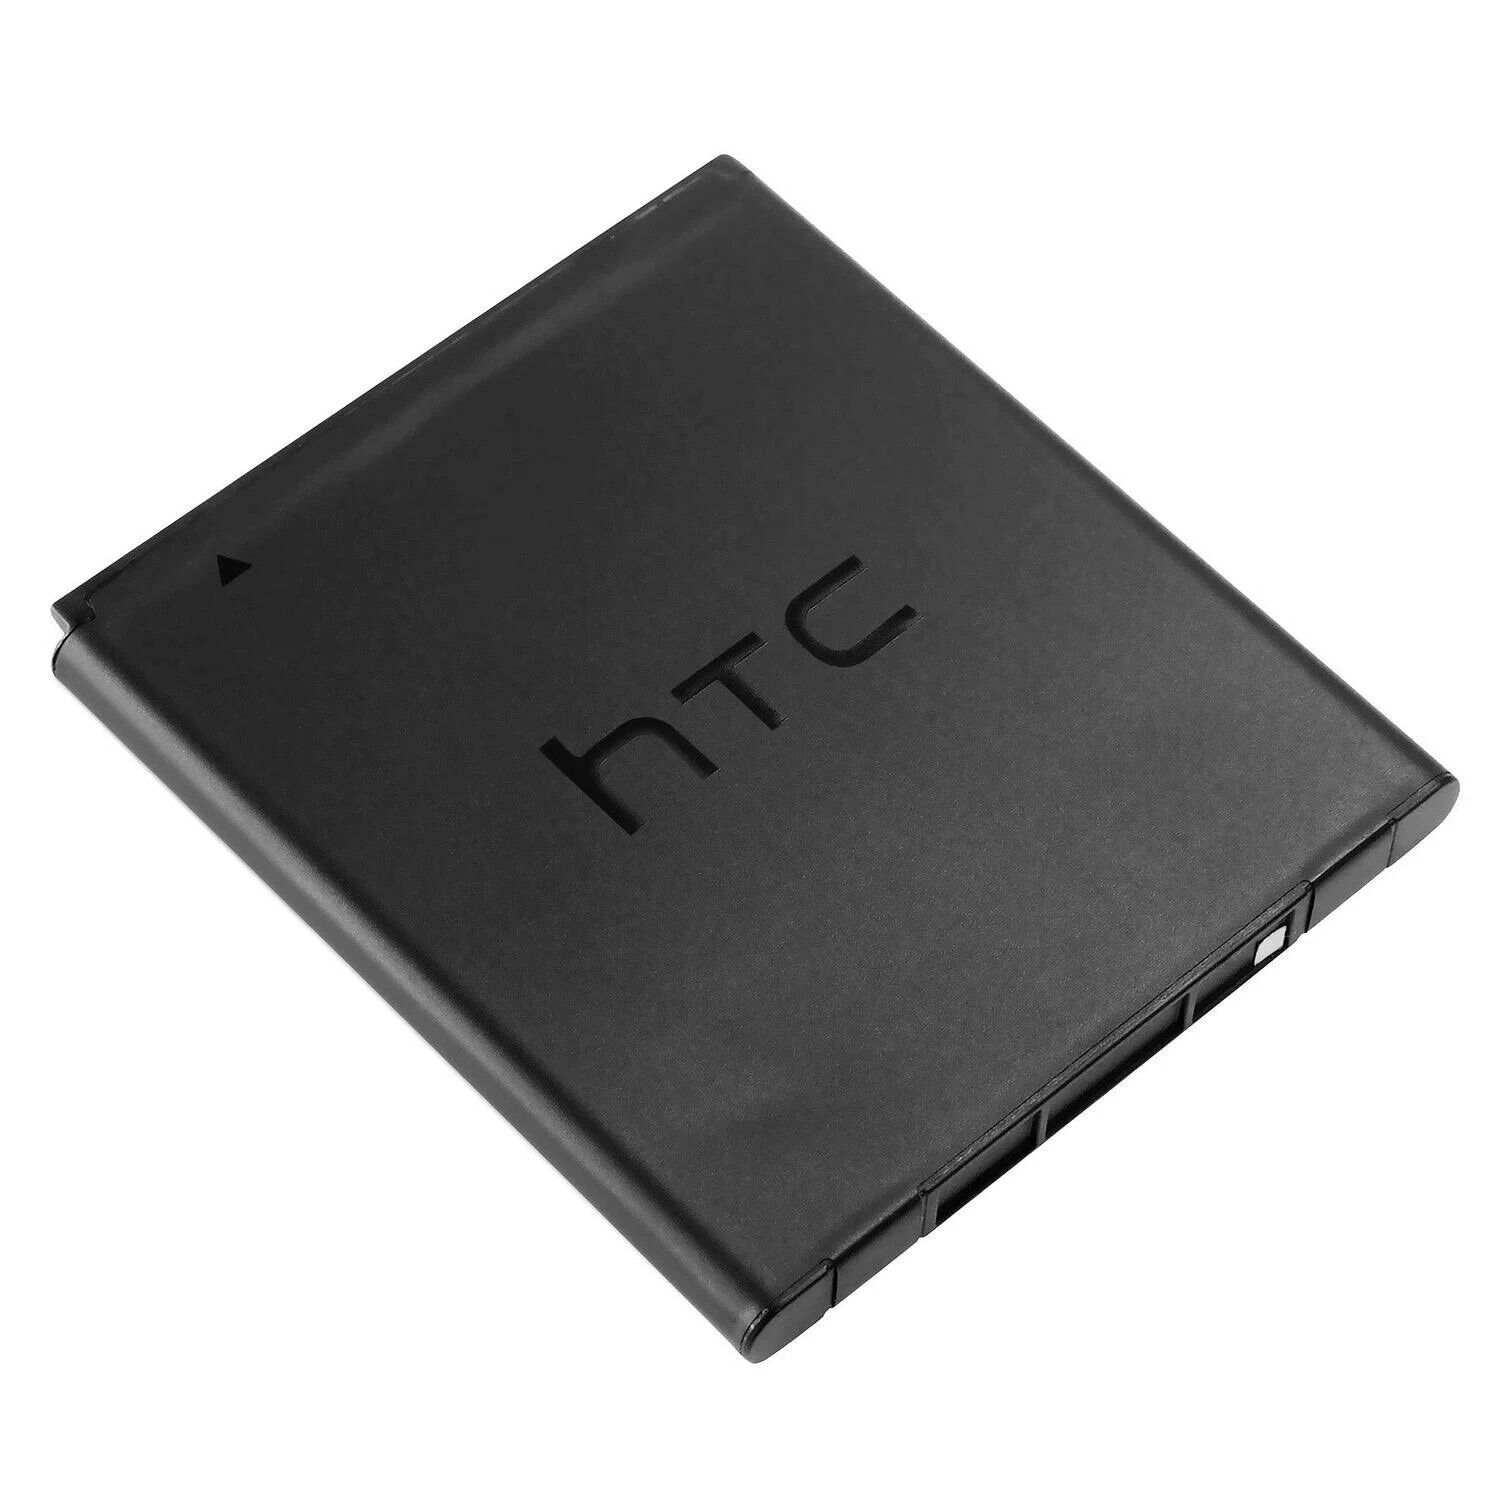 NEW OEM HTC Internal Replacement Battery for Desire 510 601 700 Boost Virgin HTC